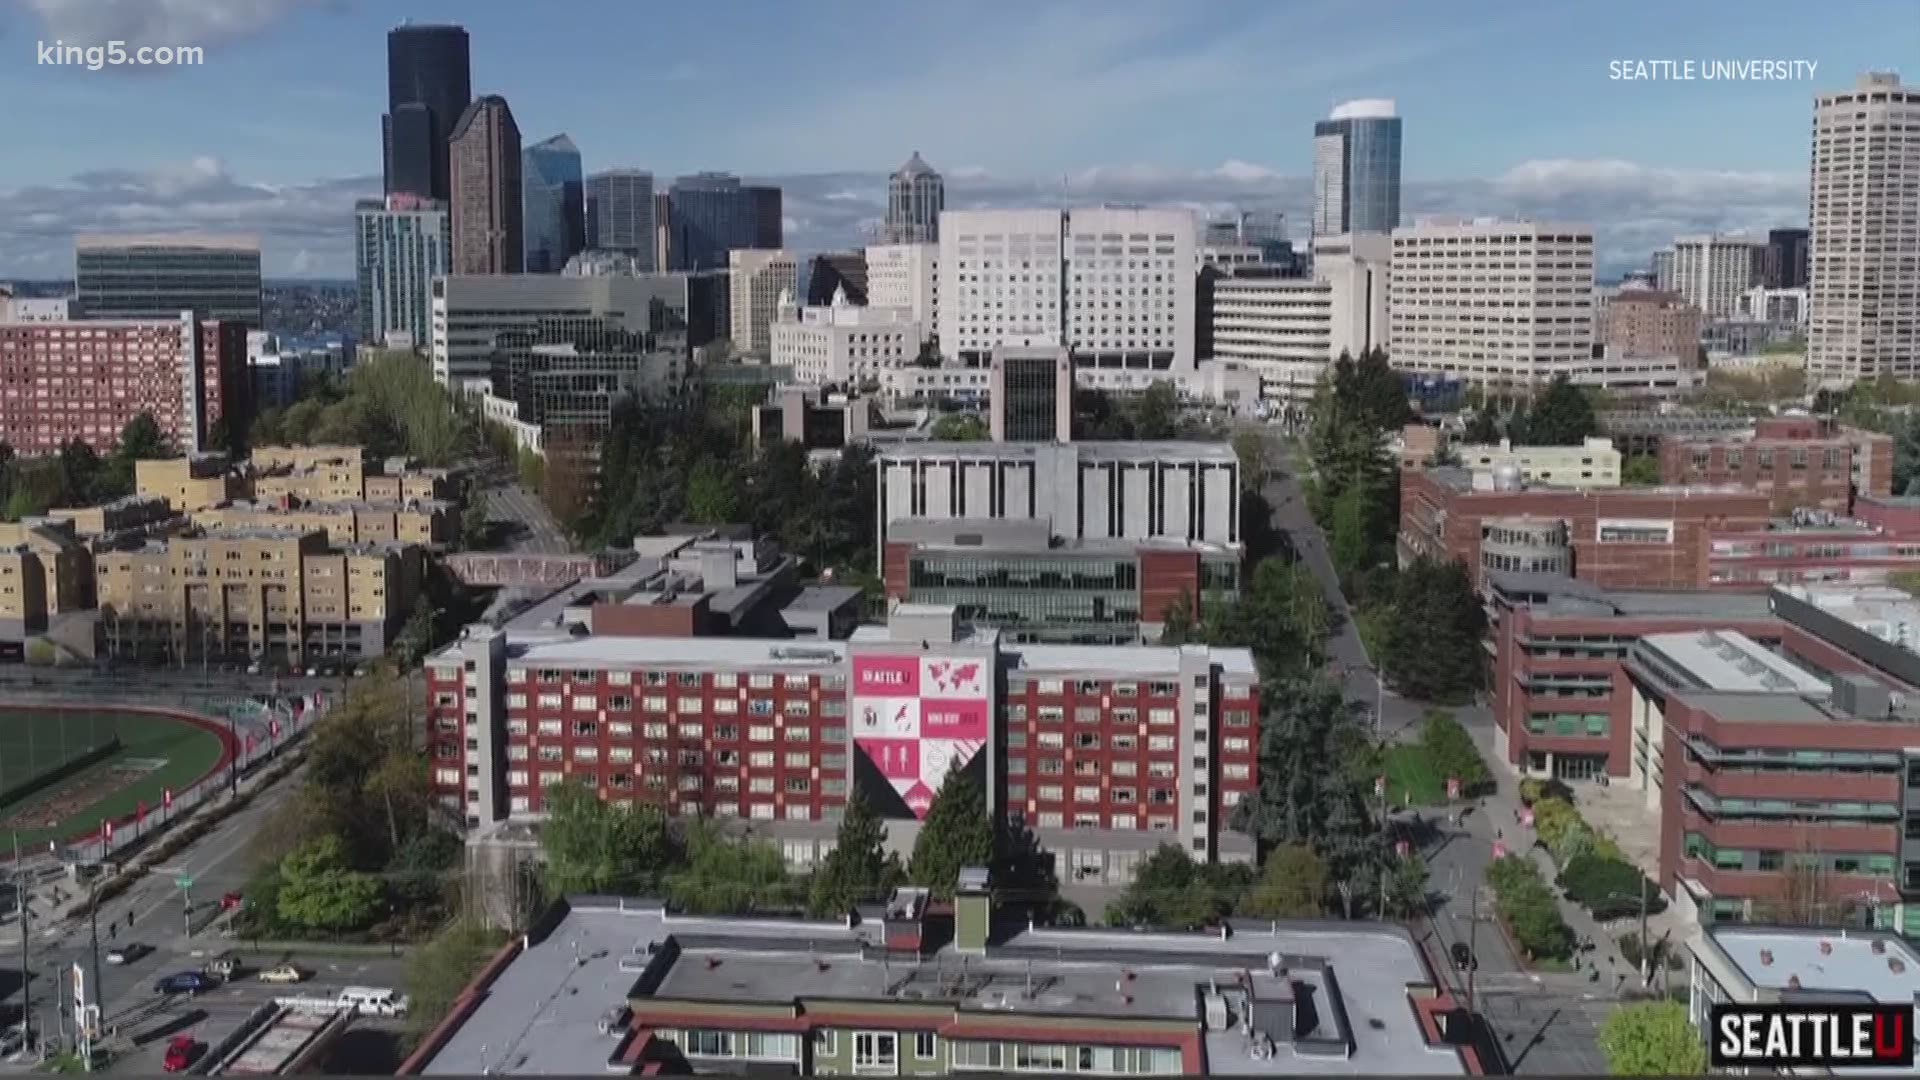 Seattle University students will see changes on campus when they move into the dorms Monday.